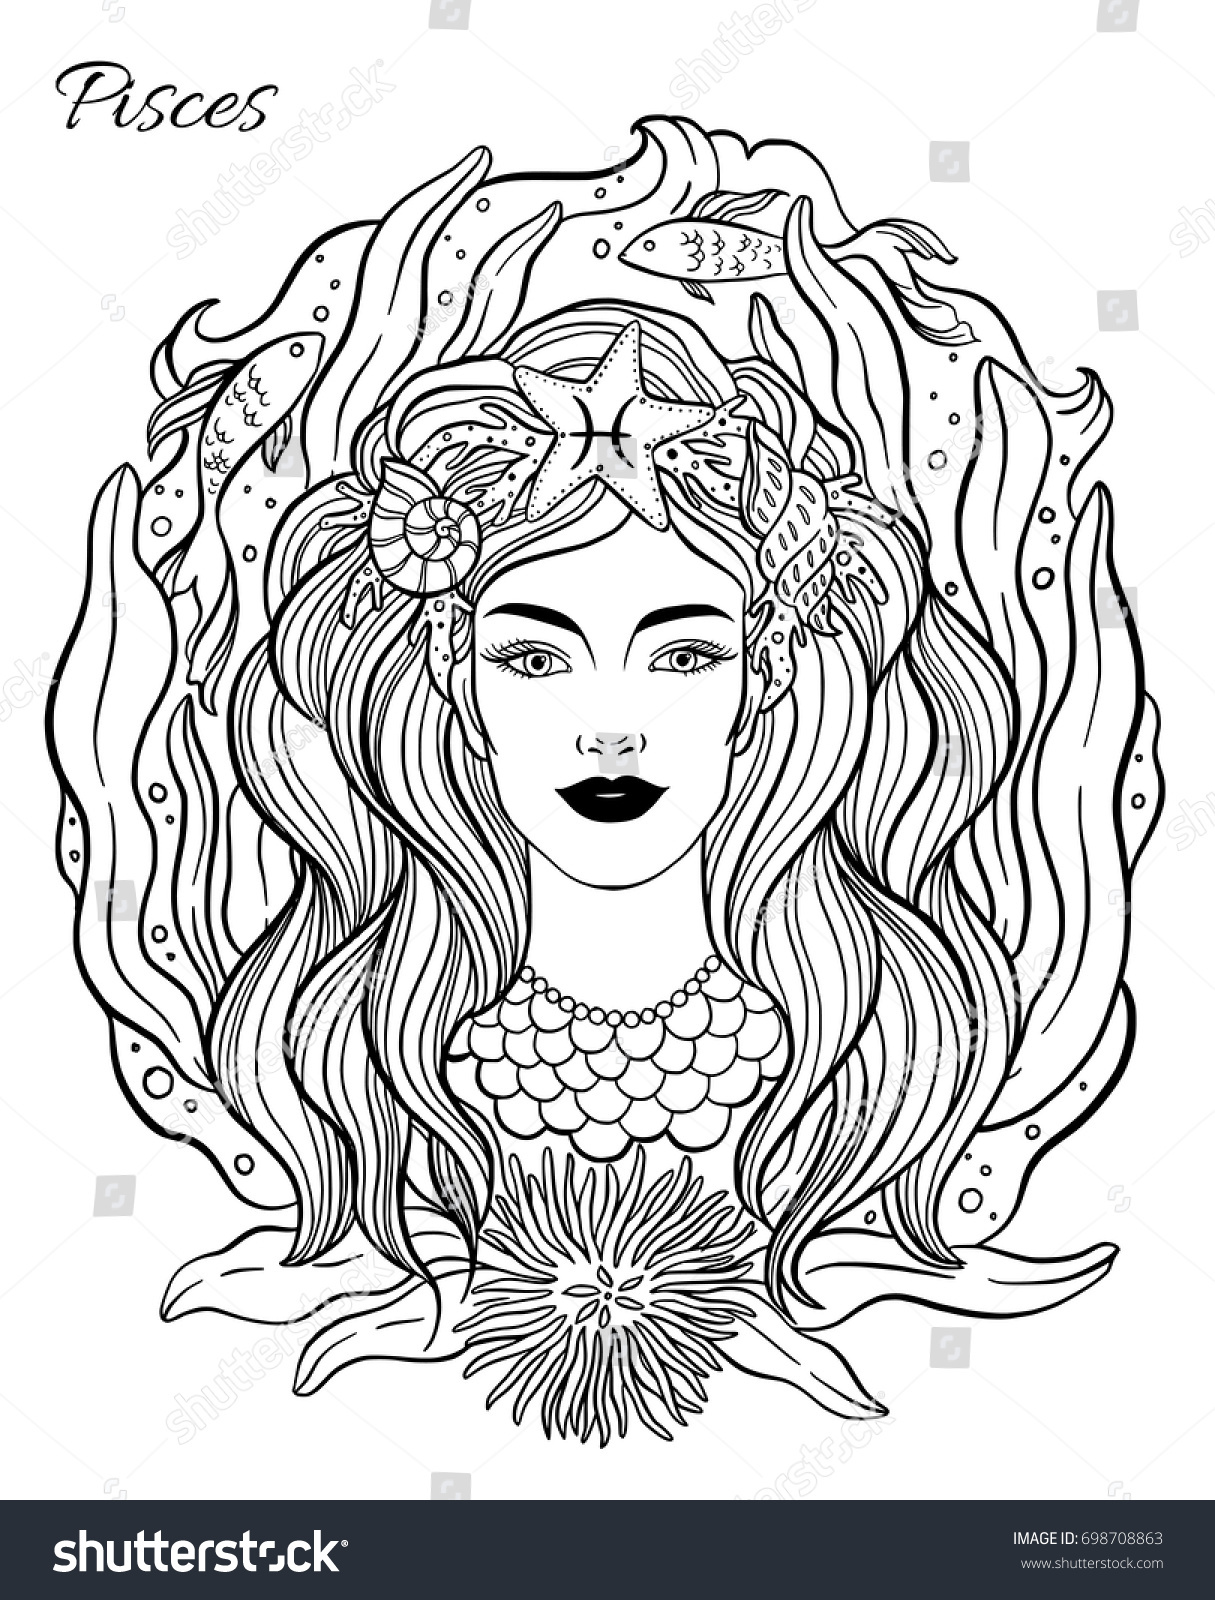 Download Zodiac Sign Pisces Woman Hand Drawn Stock Vector 698708863 - Shutterstock